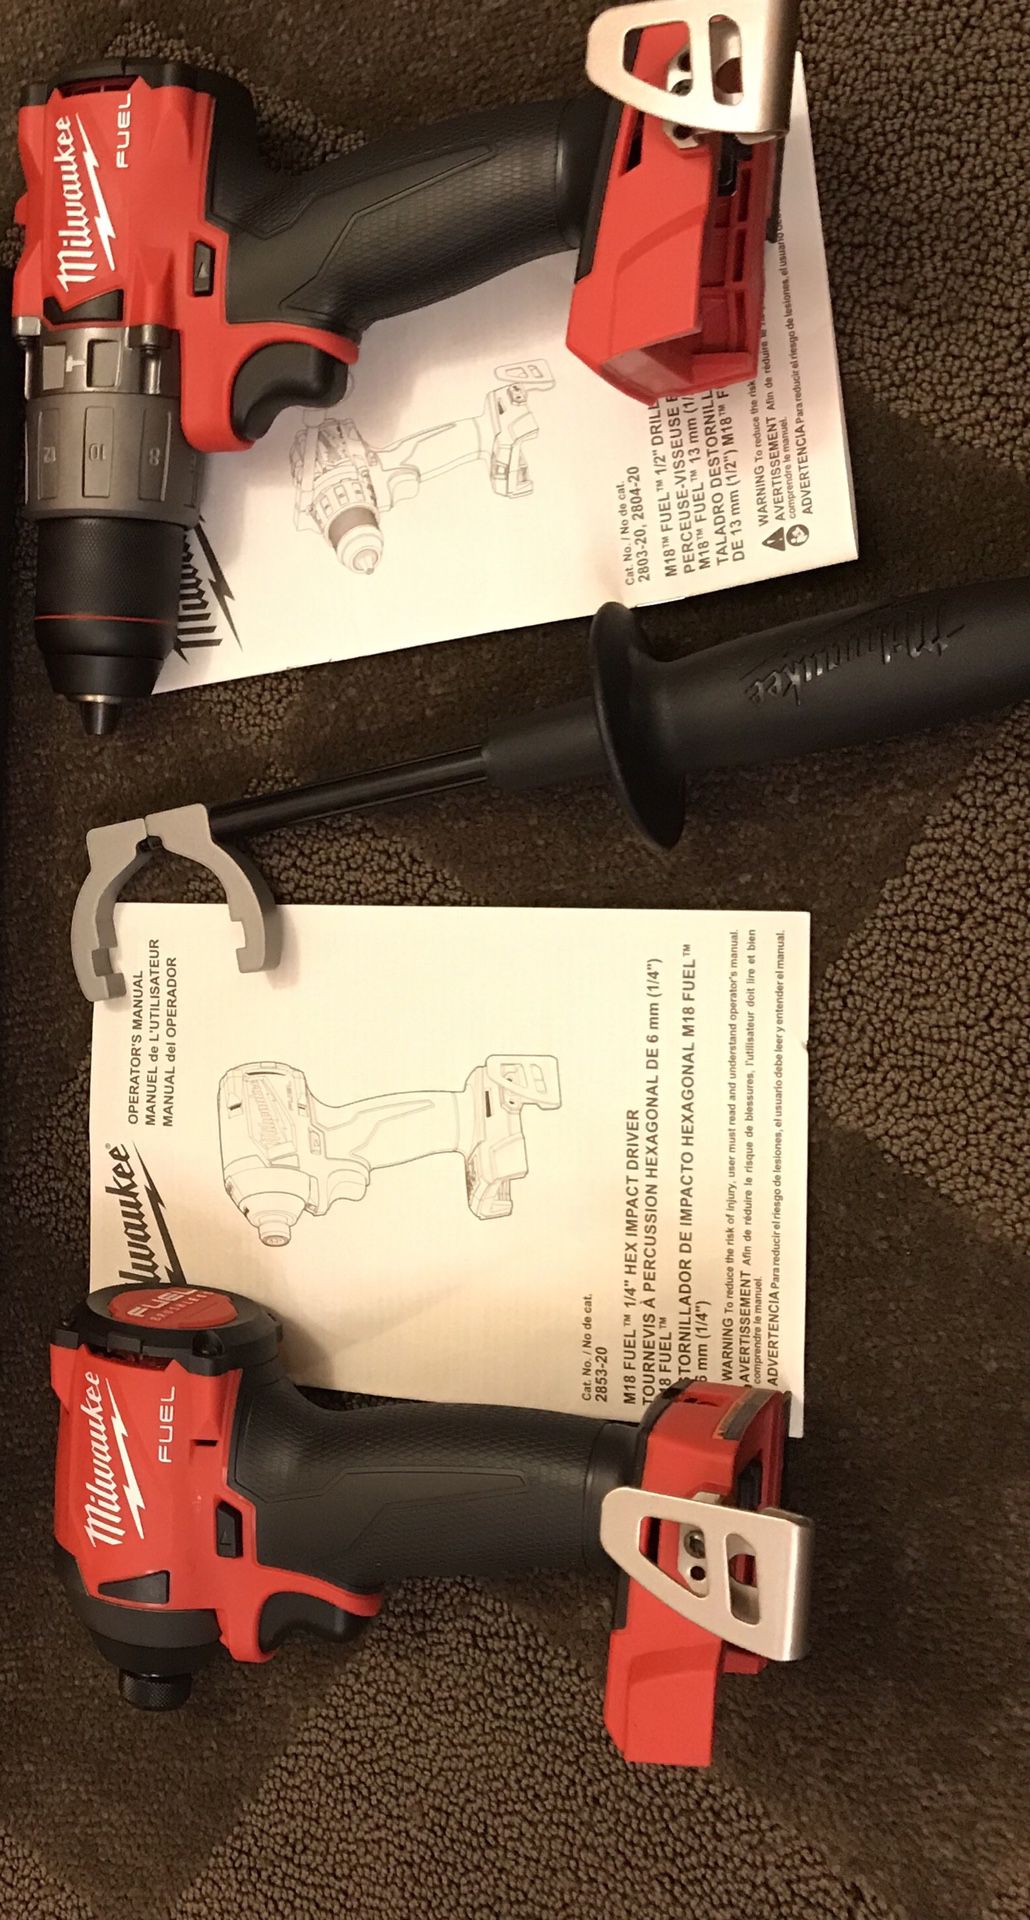 Milwaukee tools 1/2 fuel hammer drill and 1/4 fuel impact driver